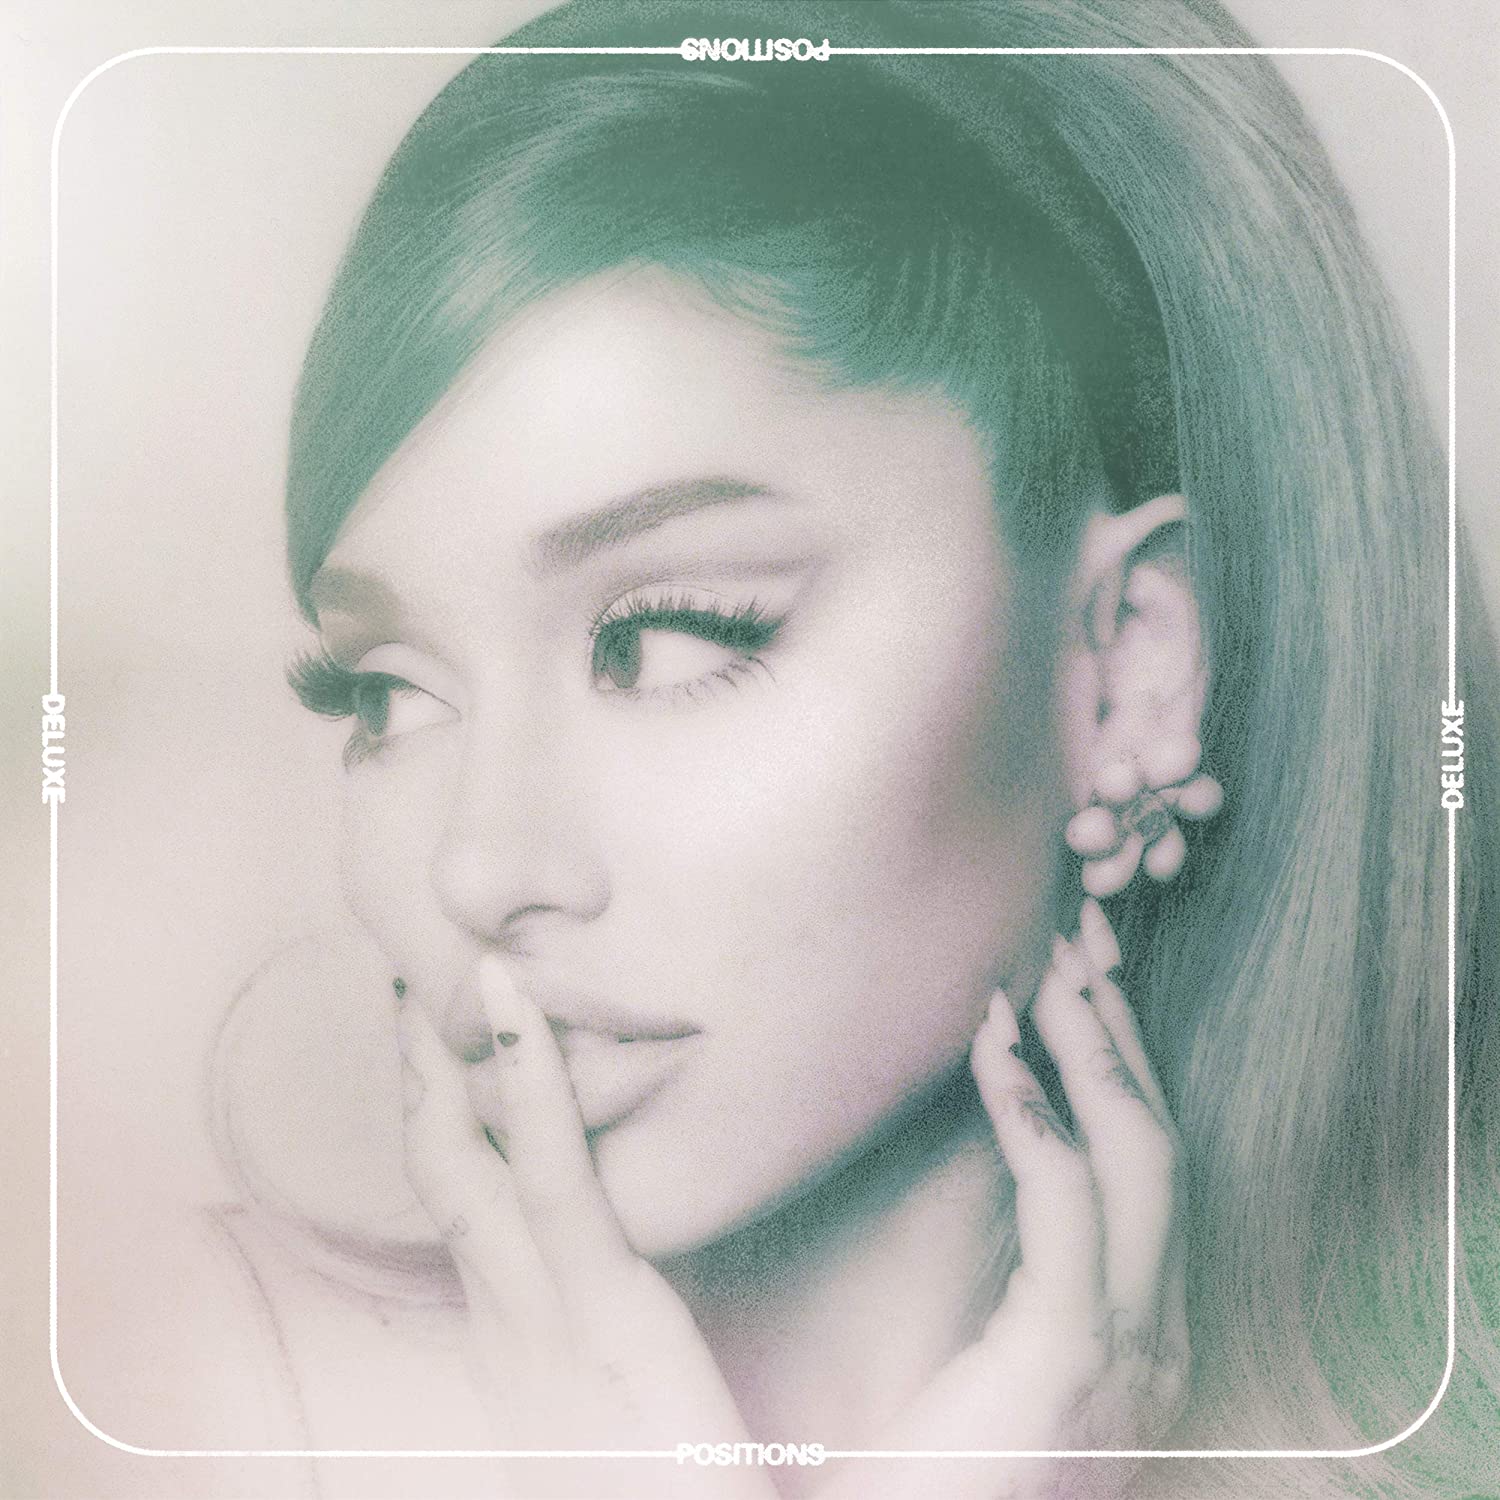 Ariana Grande-Positions-Deluxe Edition-CD-FLAC-2021-PERFECT